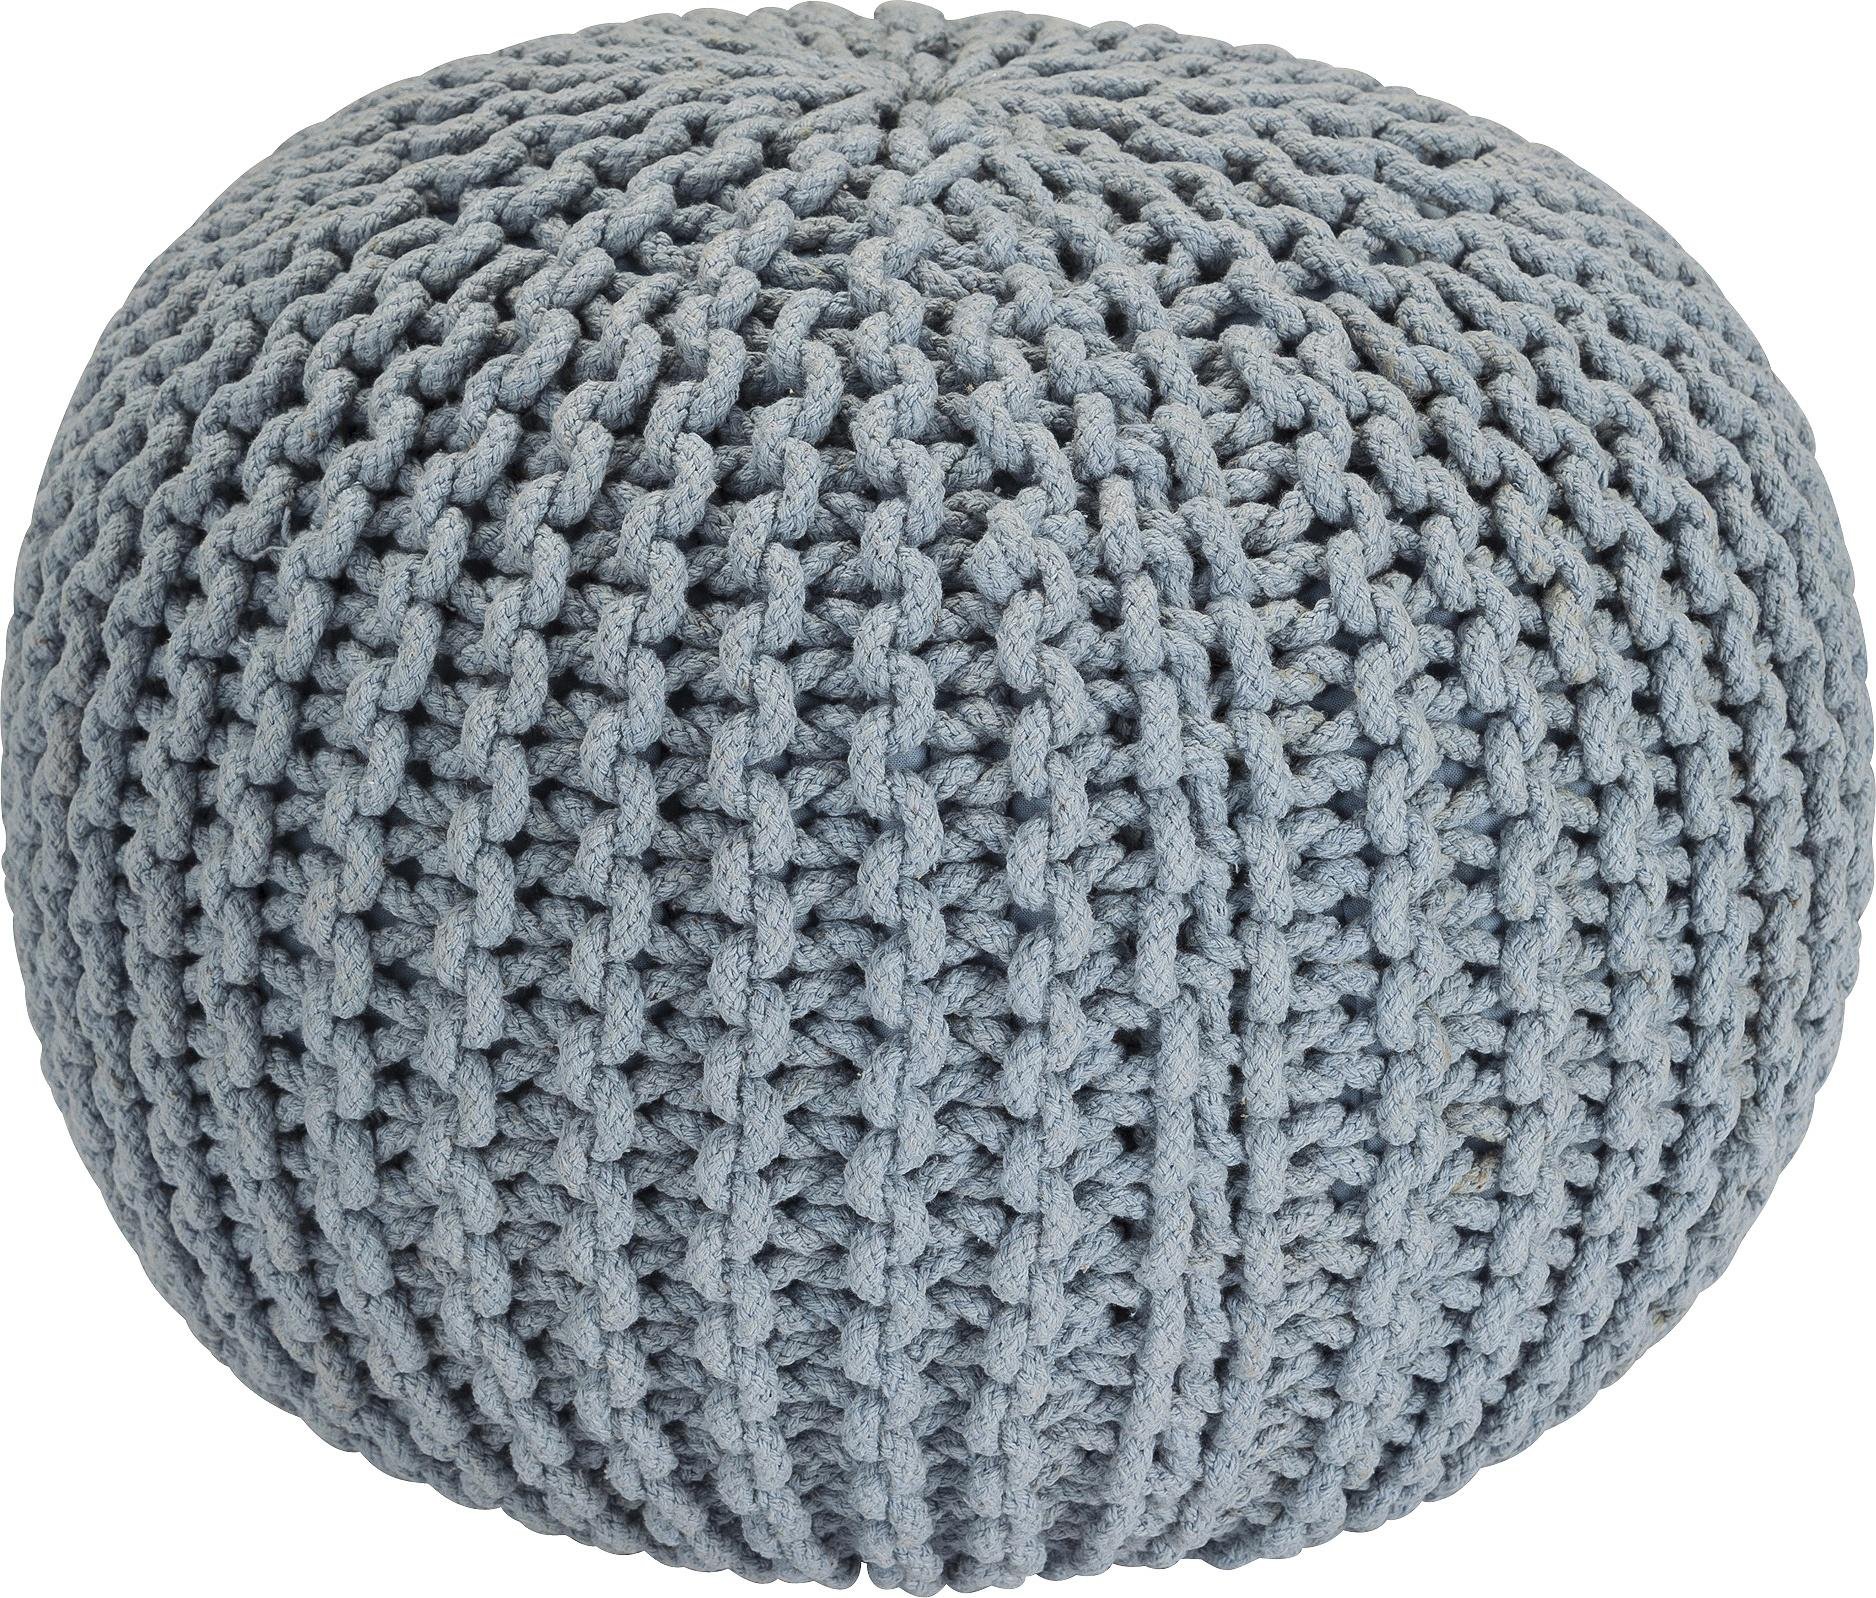 Argos Home Cotton Knitted Pod Footstool - Duck Egg